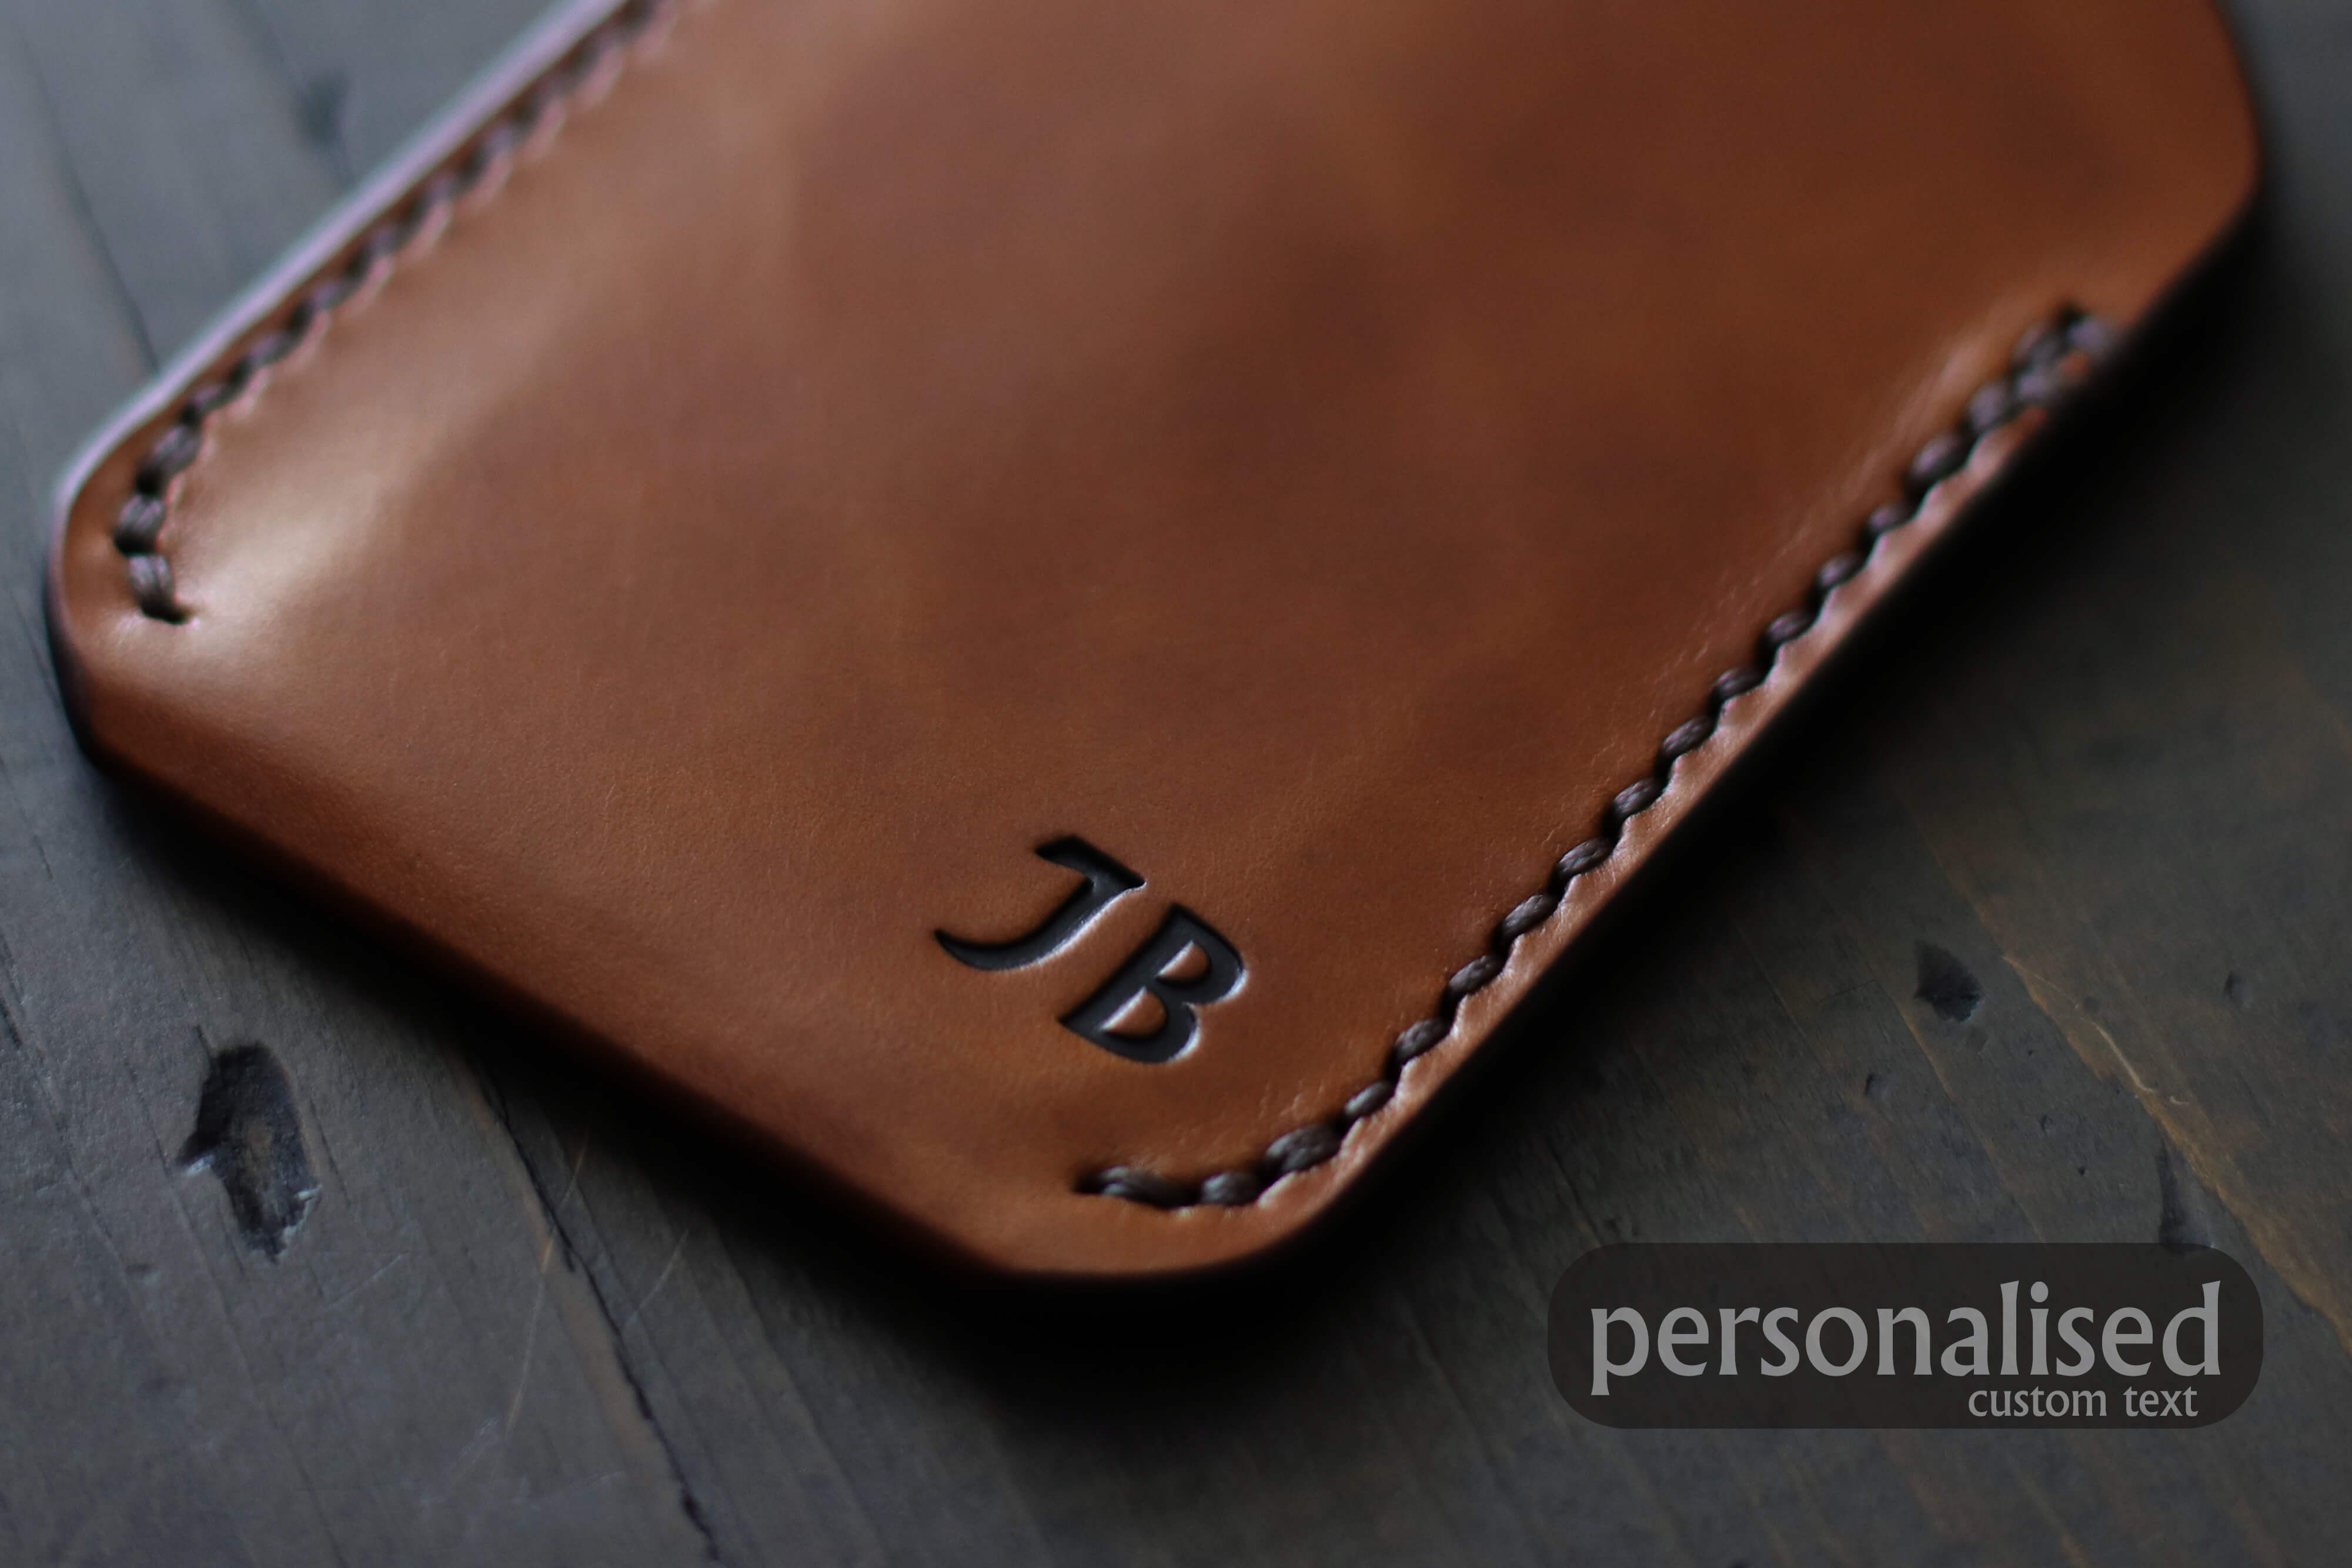 personalized leather wallet - OCHRE handcrafted